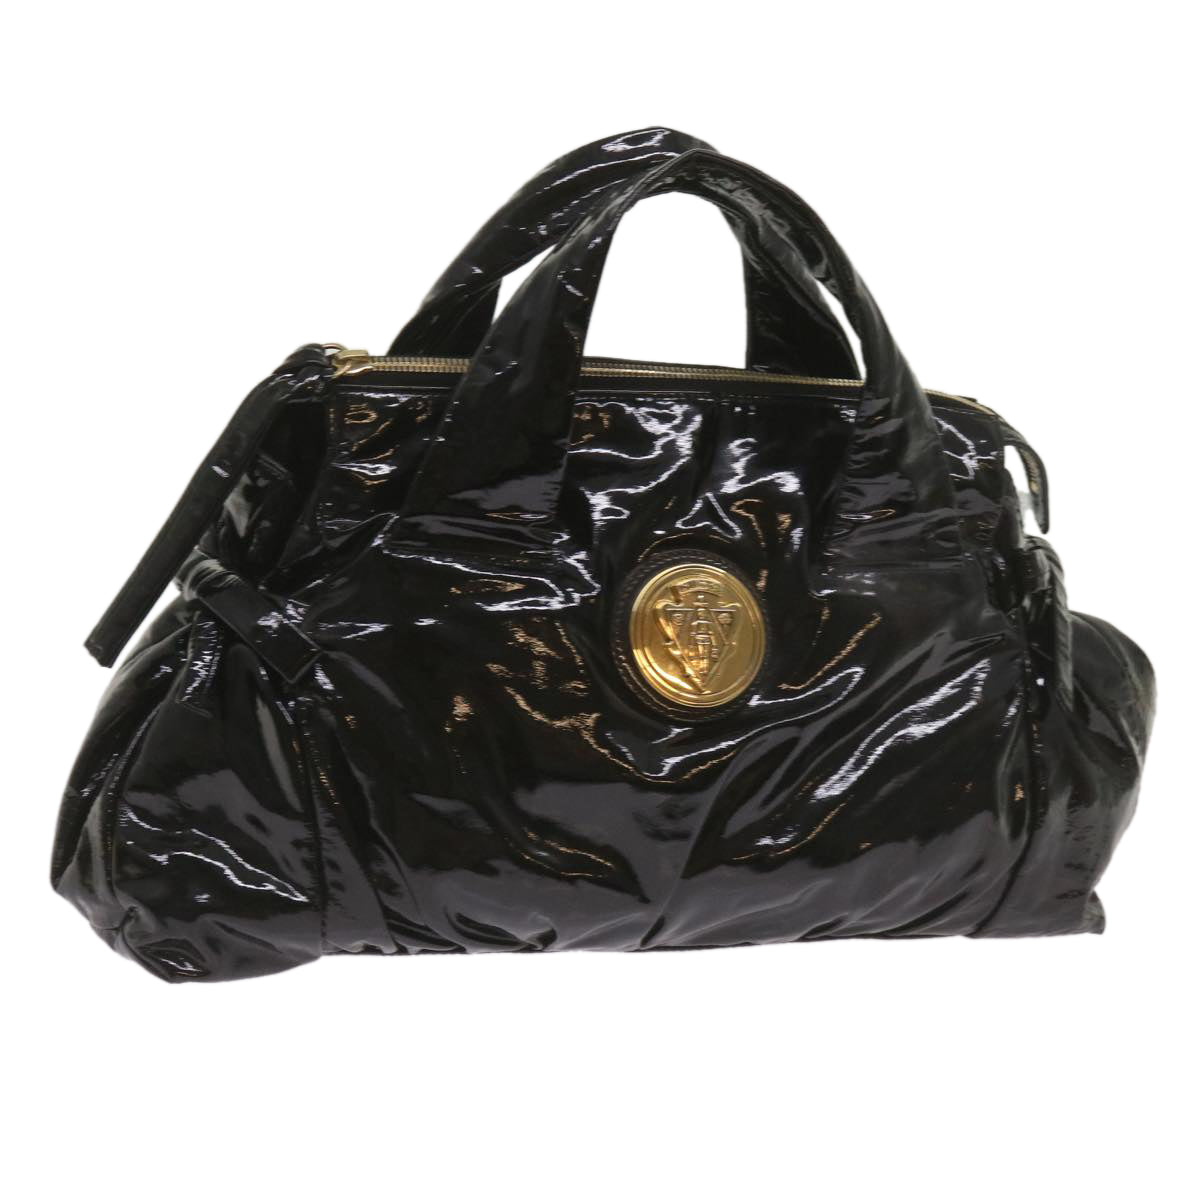 GUCCI Hand Bag Patent leather Black 197020 Auth bs12891